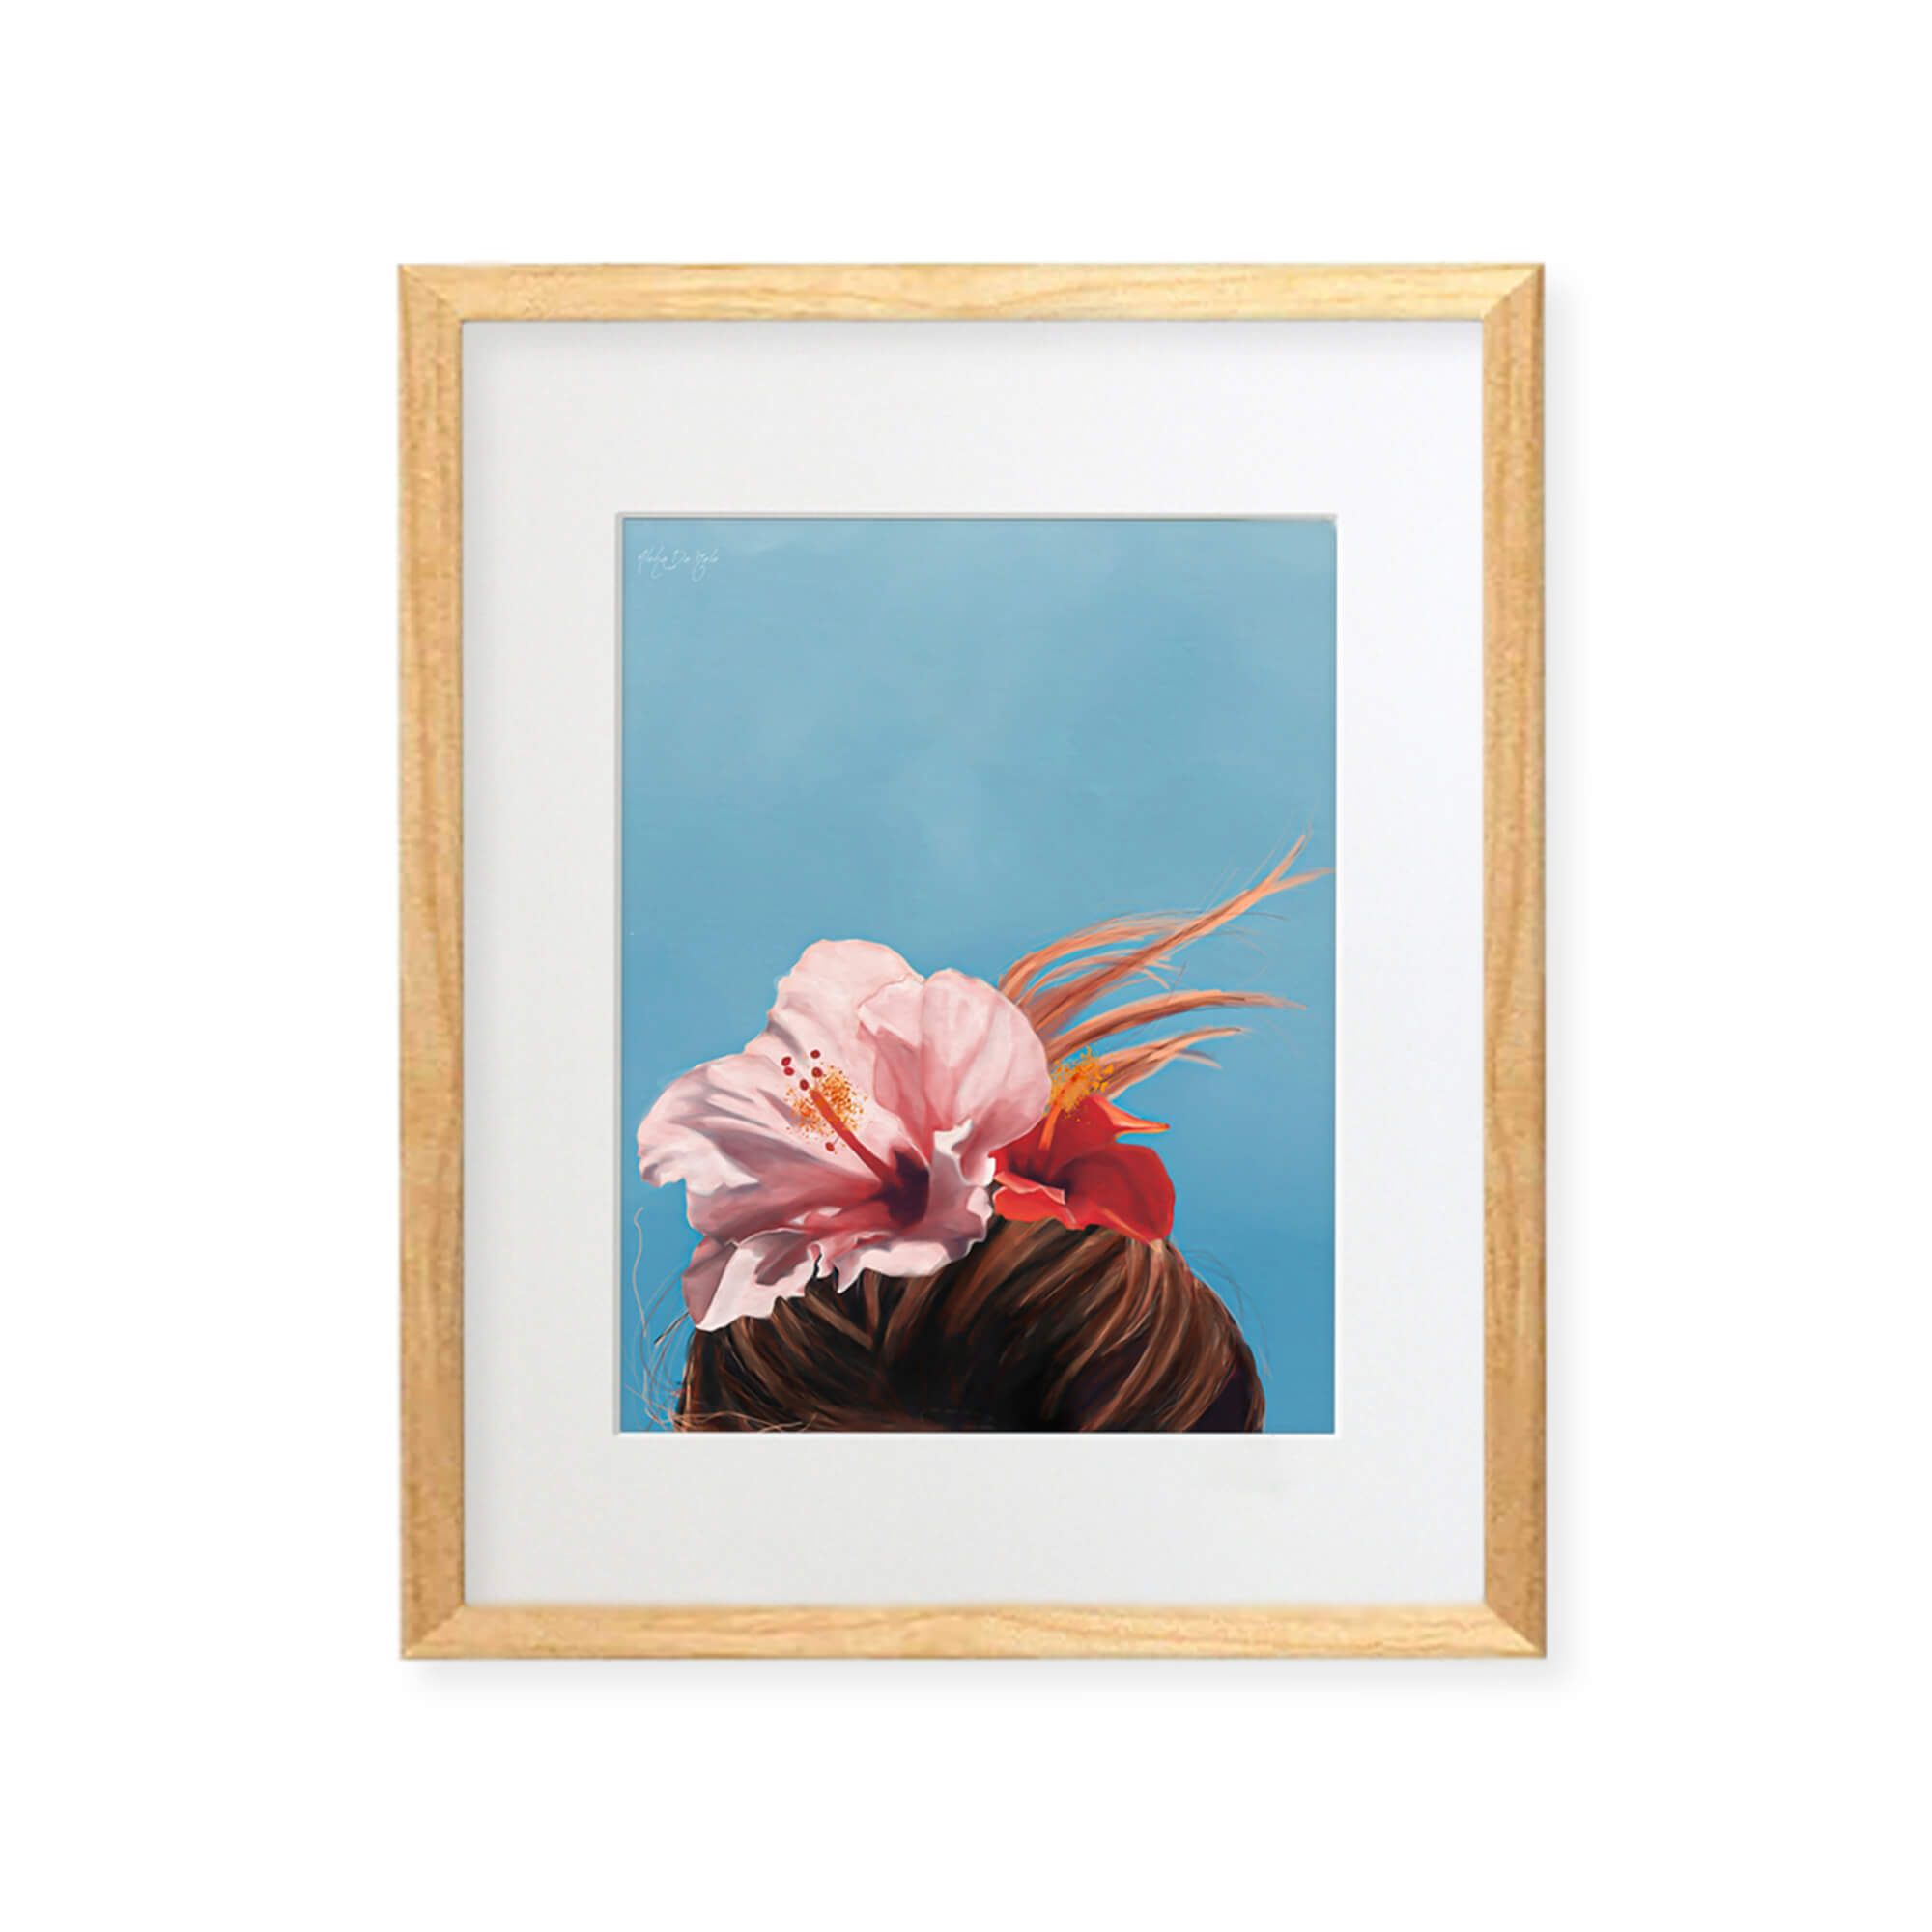 A framed matted art print of a woman's hair with colorful hibiscus flowers by Hawaii artist Aloha De Mele